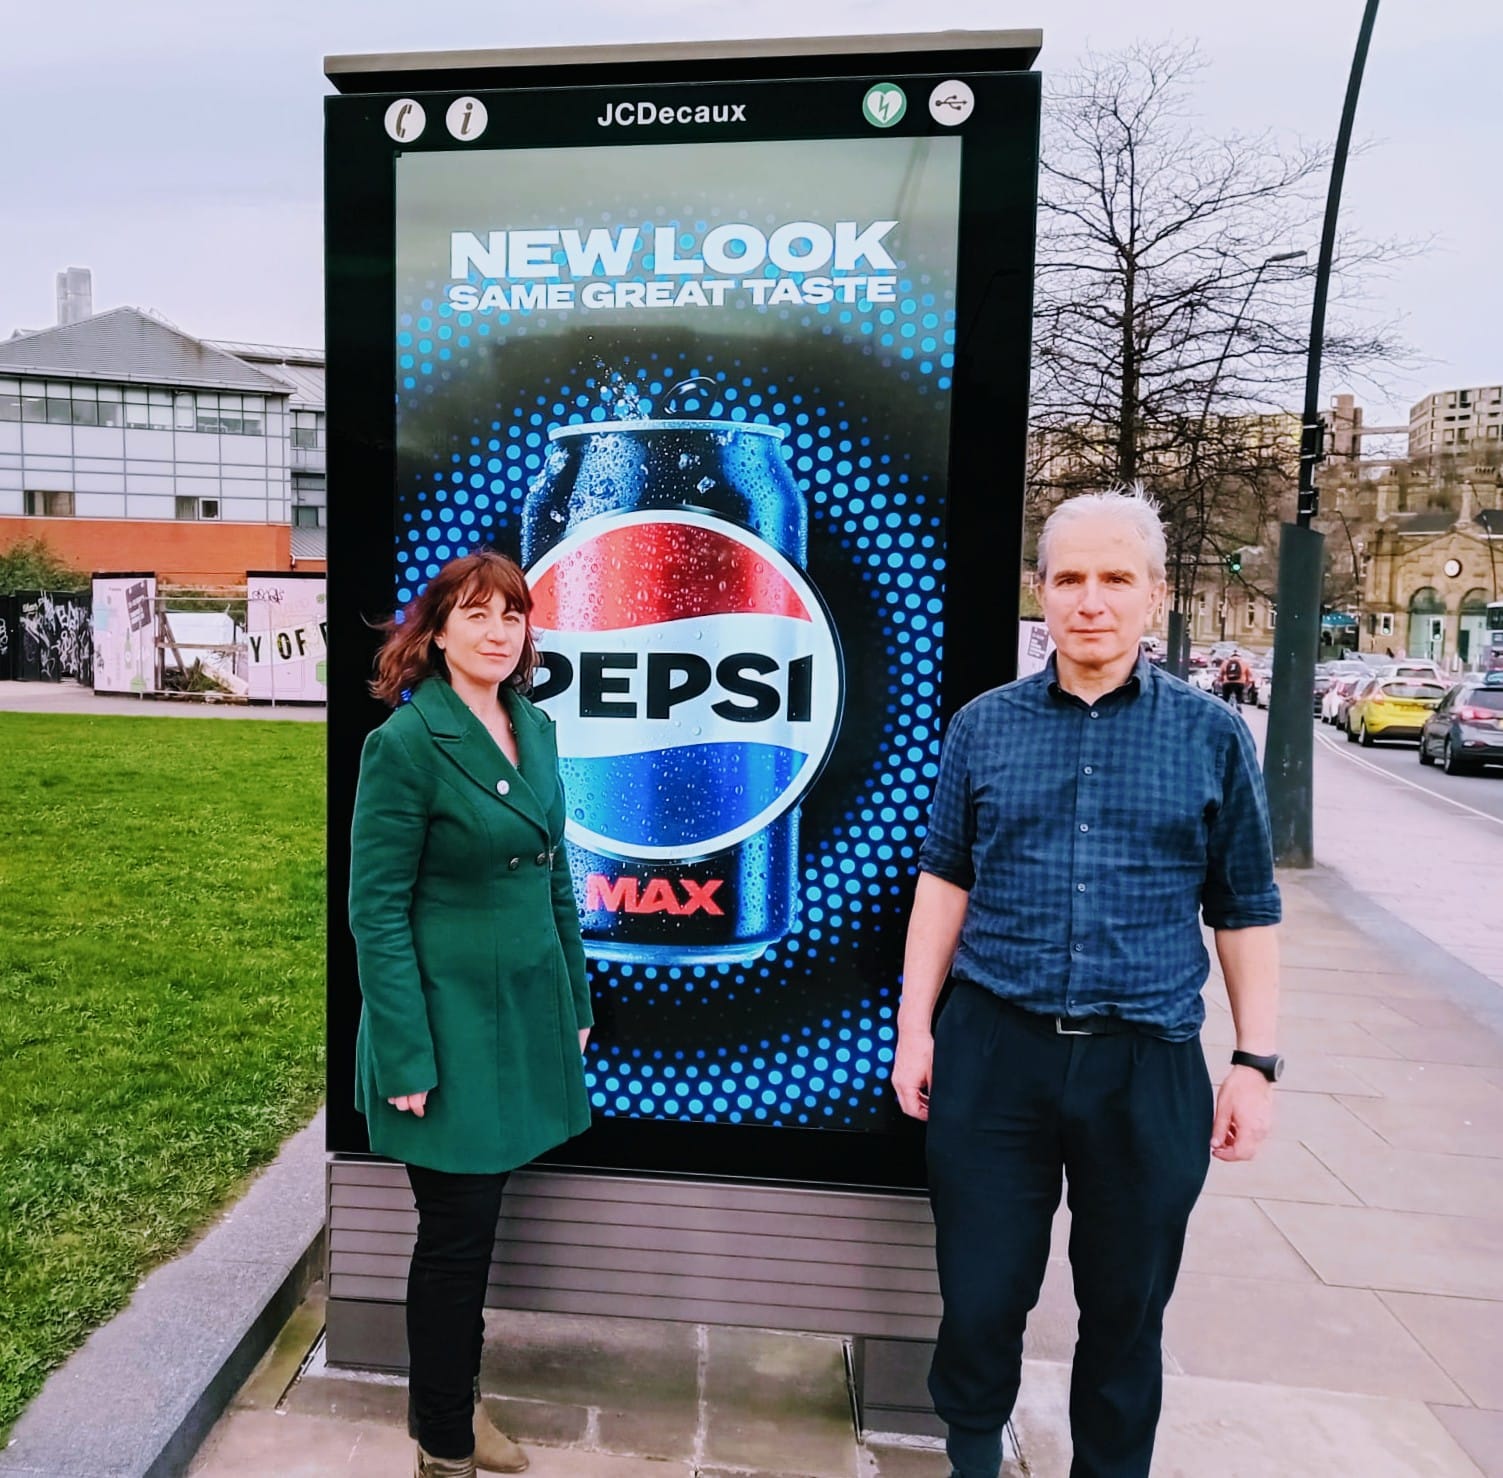 Councillors Marieanne Elliot and Toby Mallinson in front of a digital billboard sited in the pavement